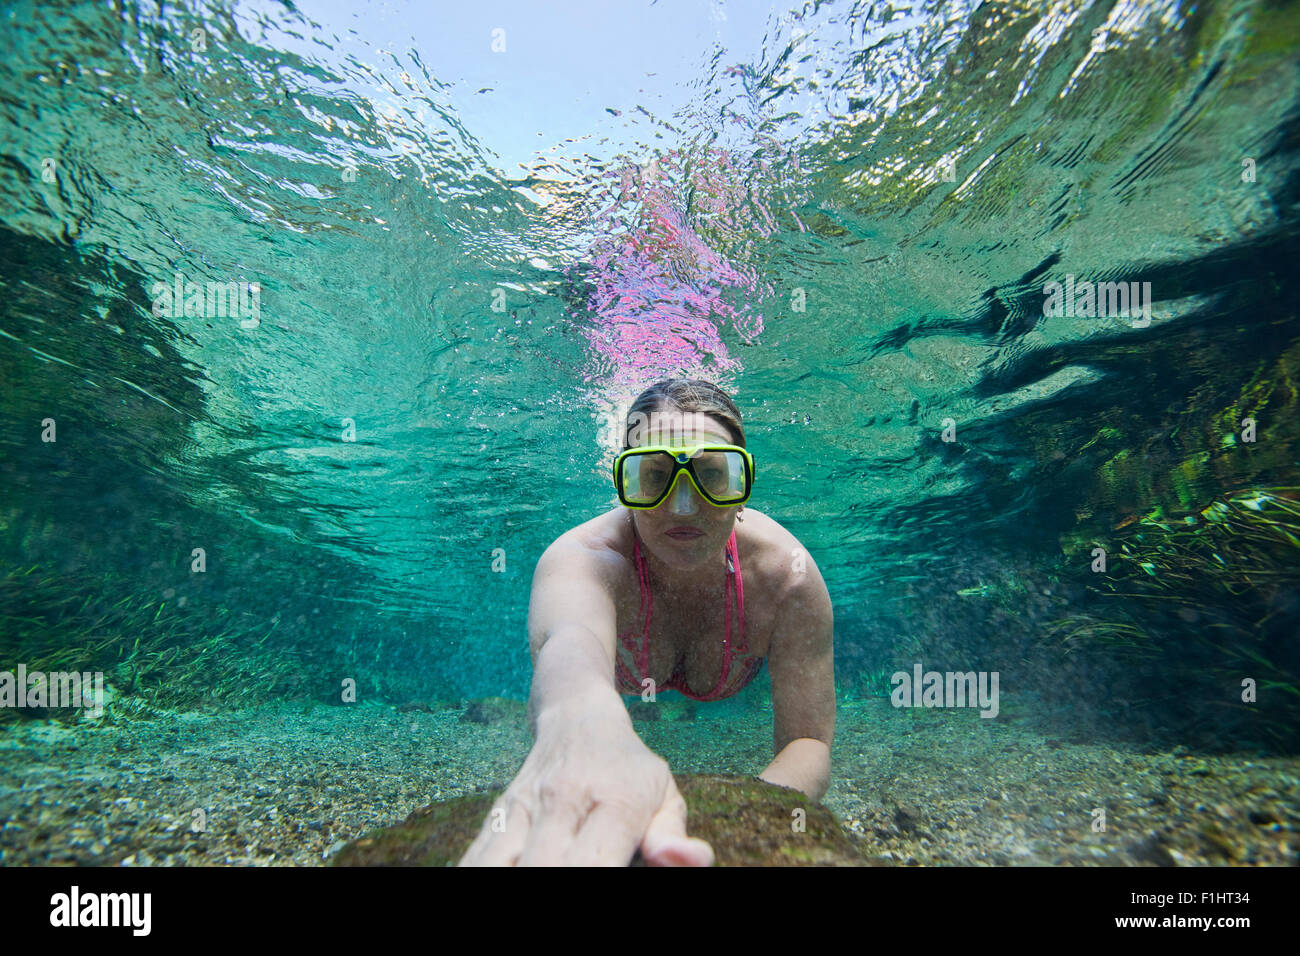 Underwater Photo showing a female swimmer swim through Rock Springs Run in Kelly Park in Central Florida Stock Photo